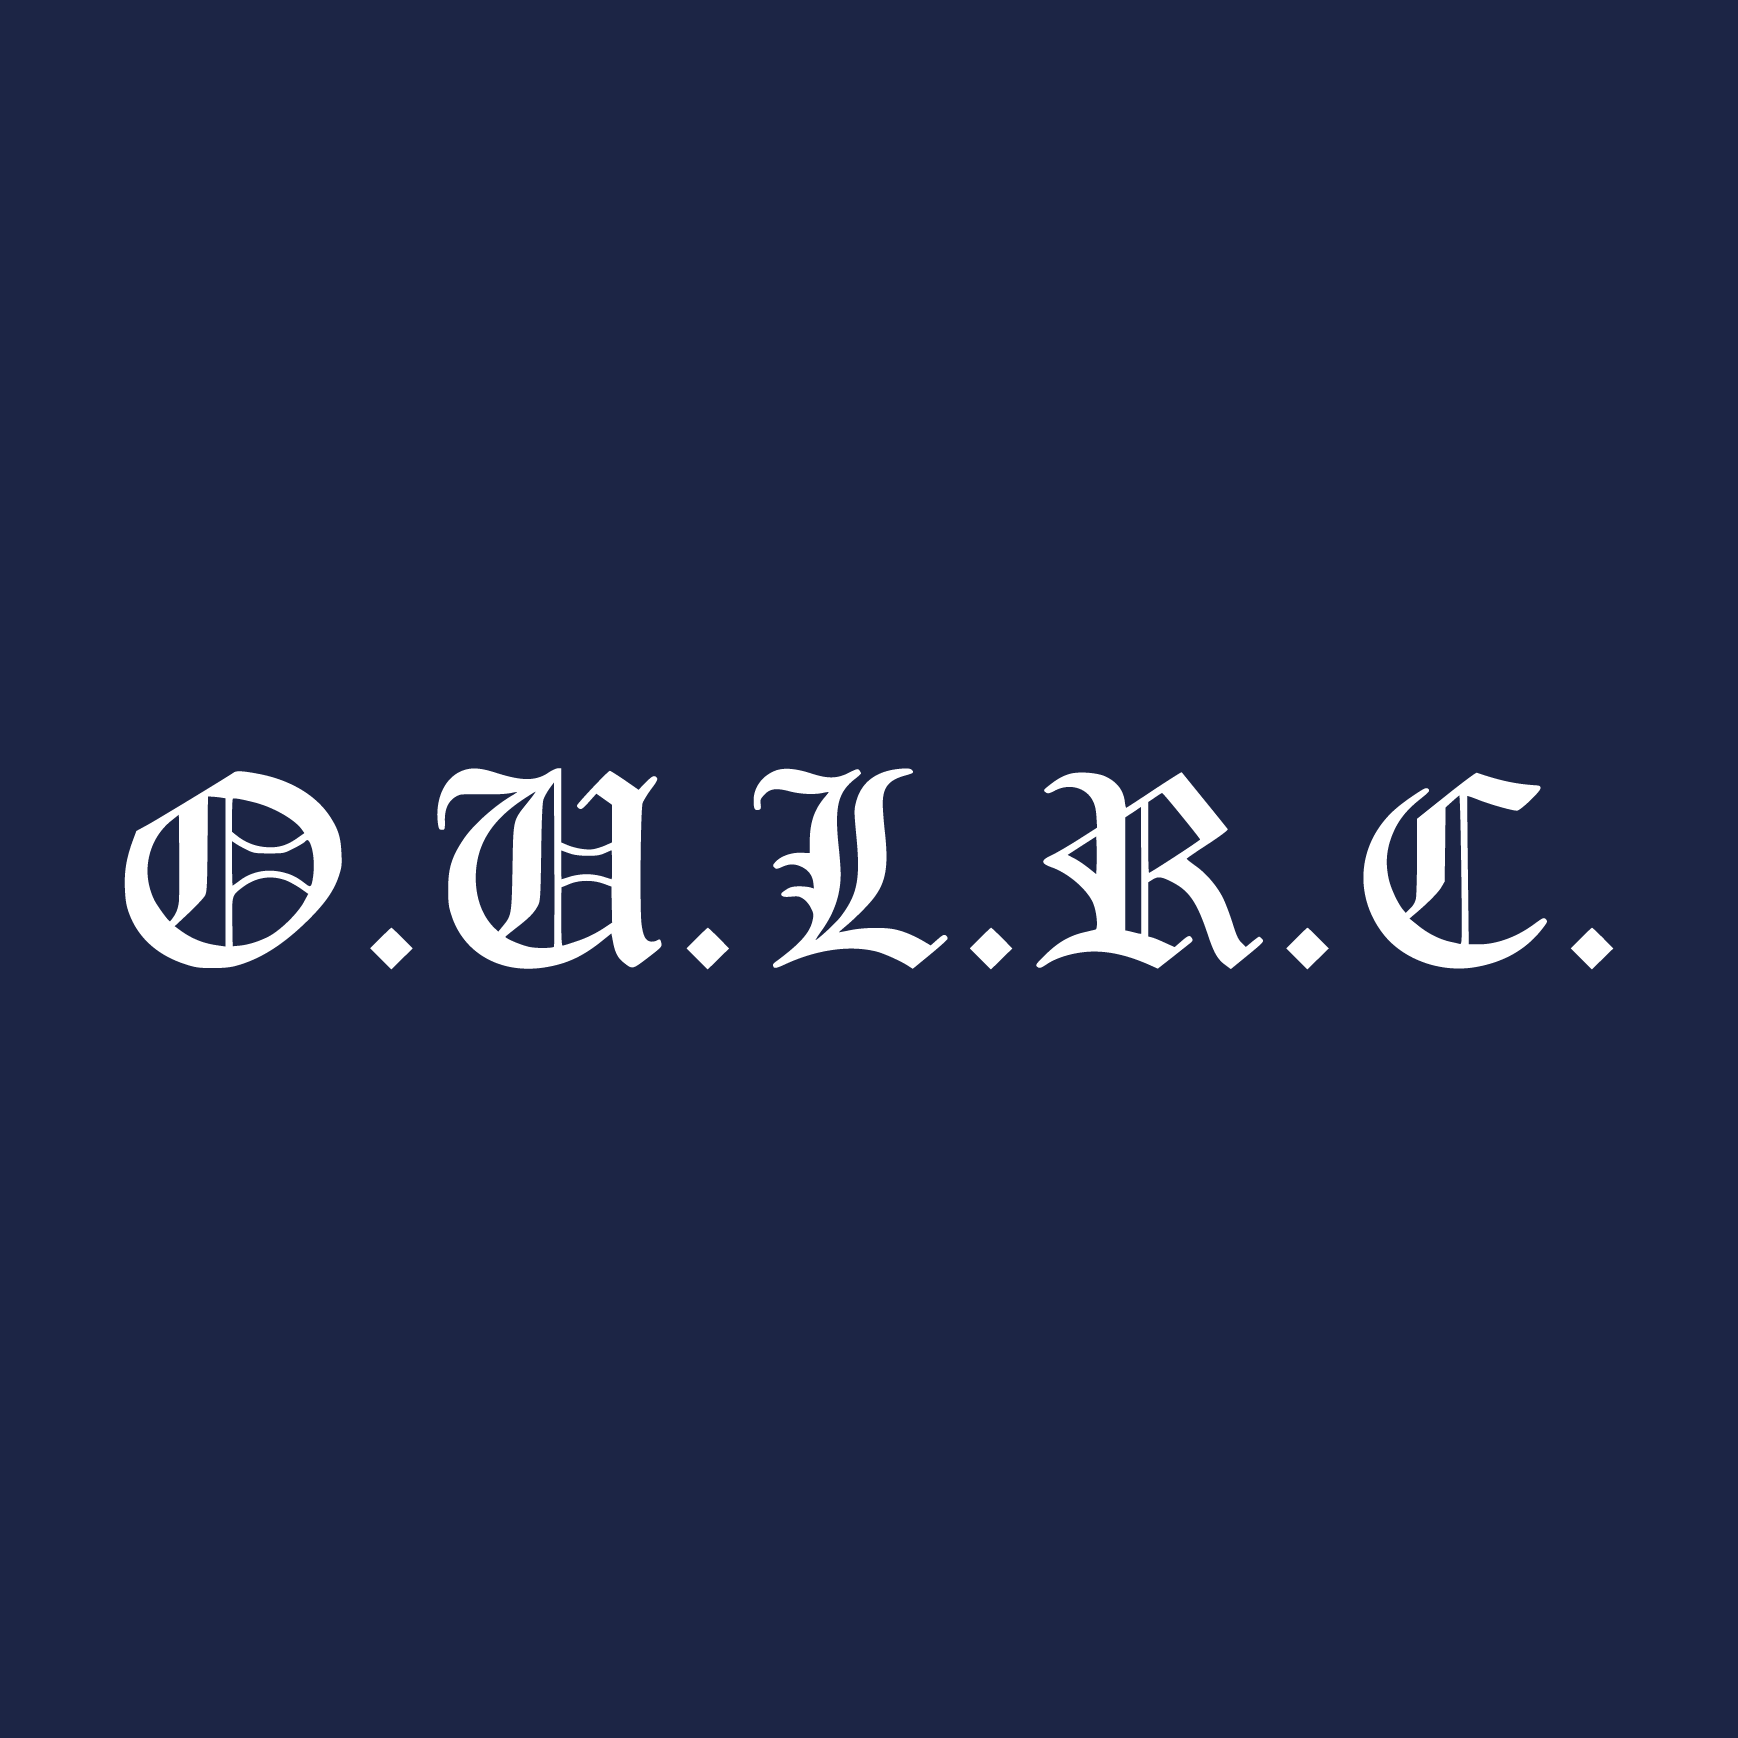 Club Image for OULRC